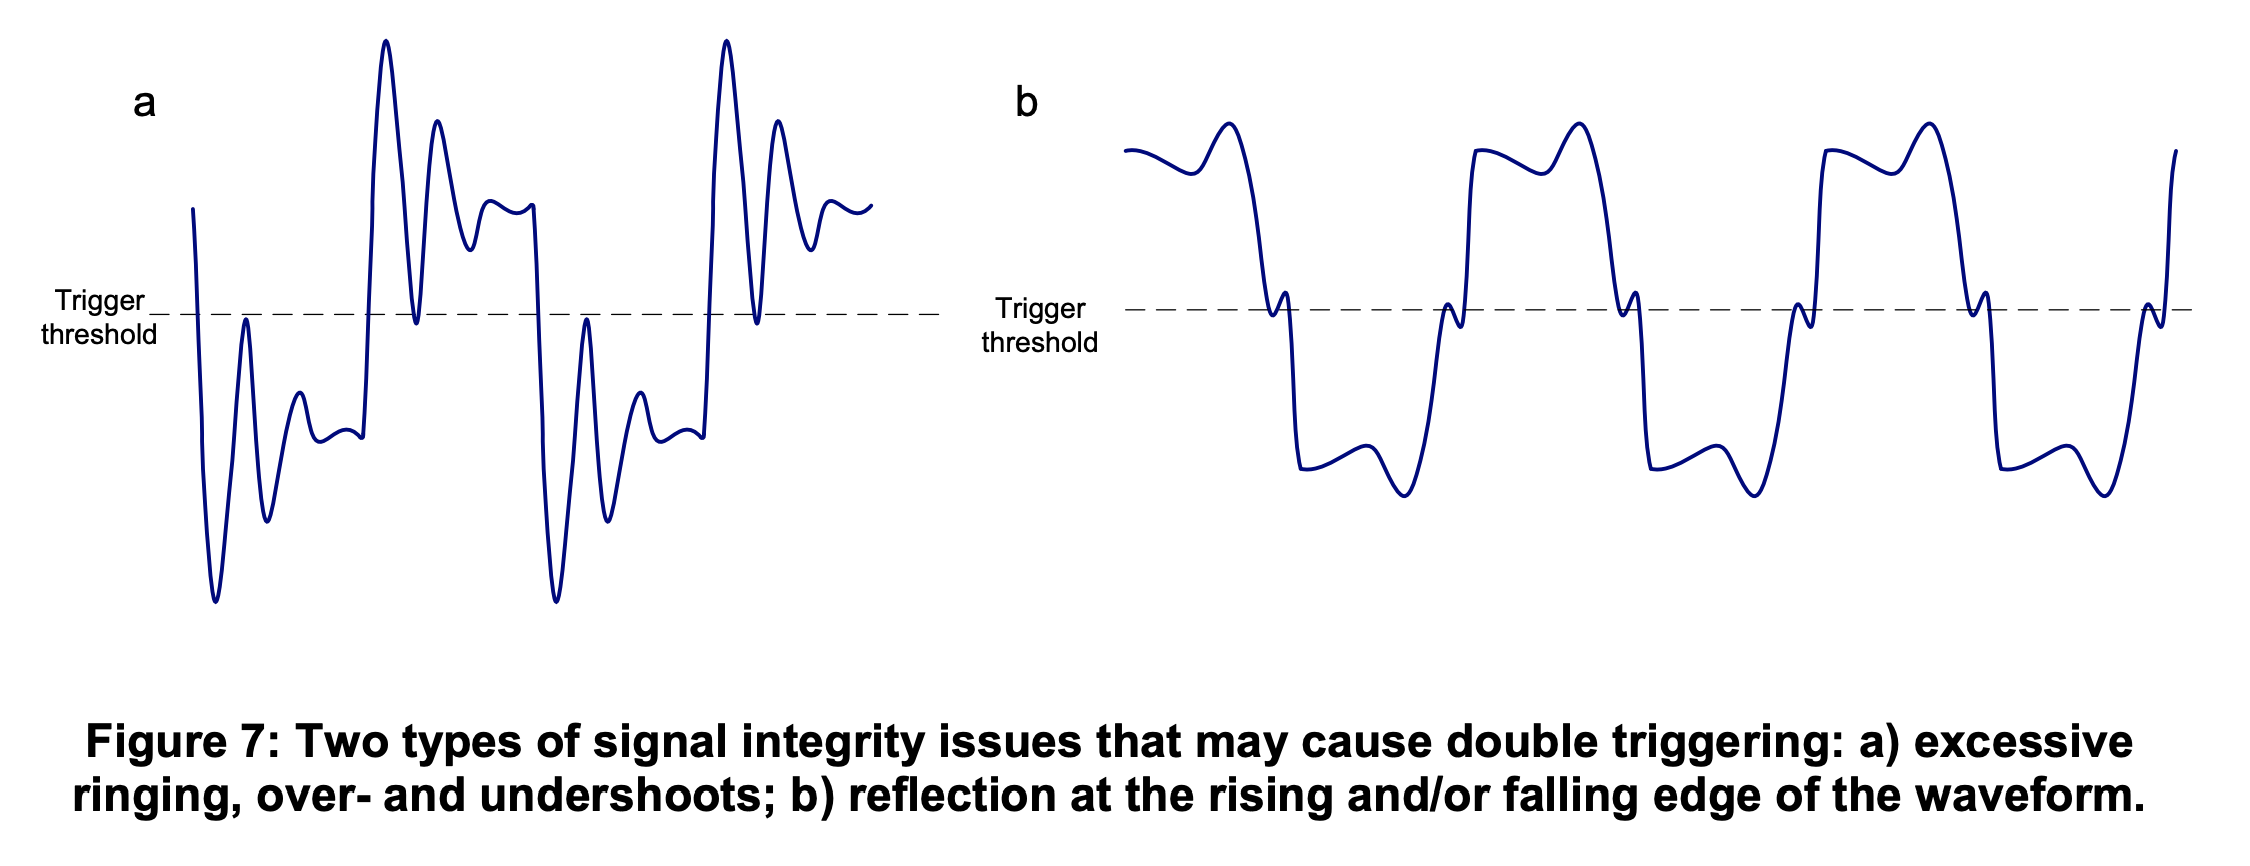 Figure 7 Two types of signal integrity issues that may cause double triggering